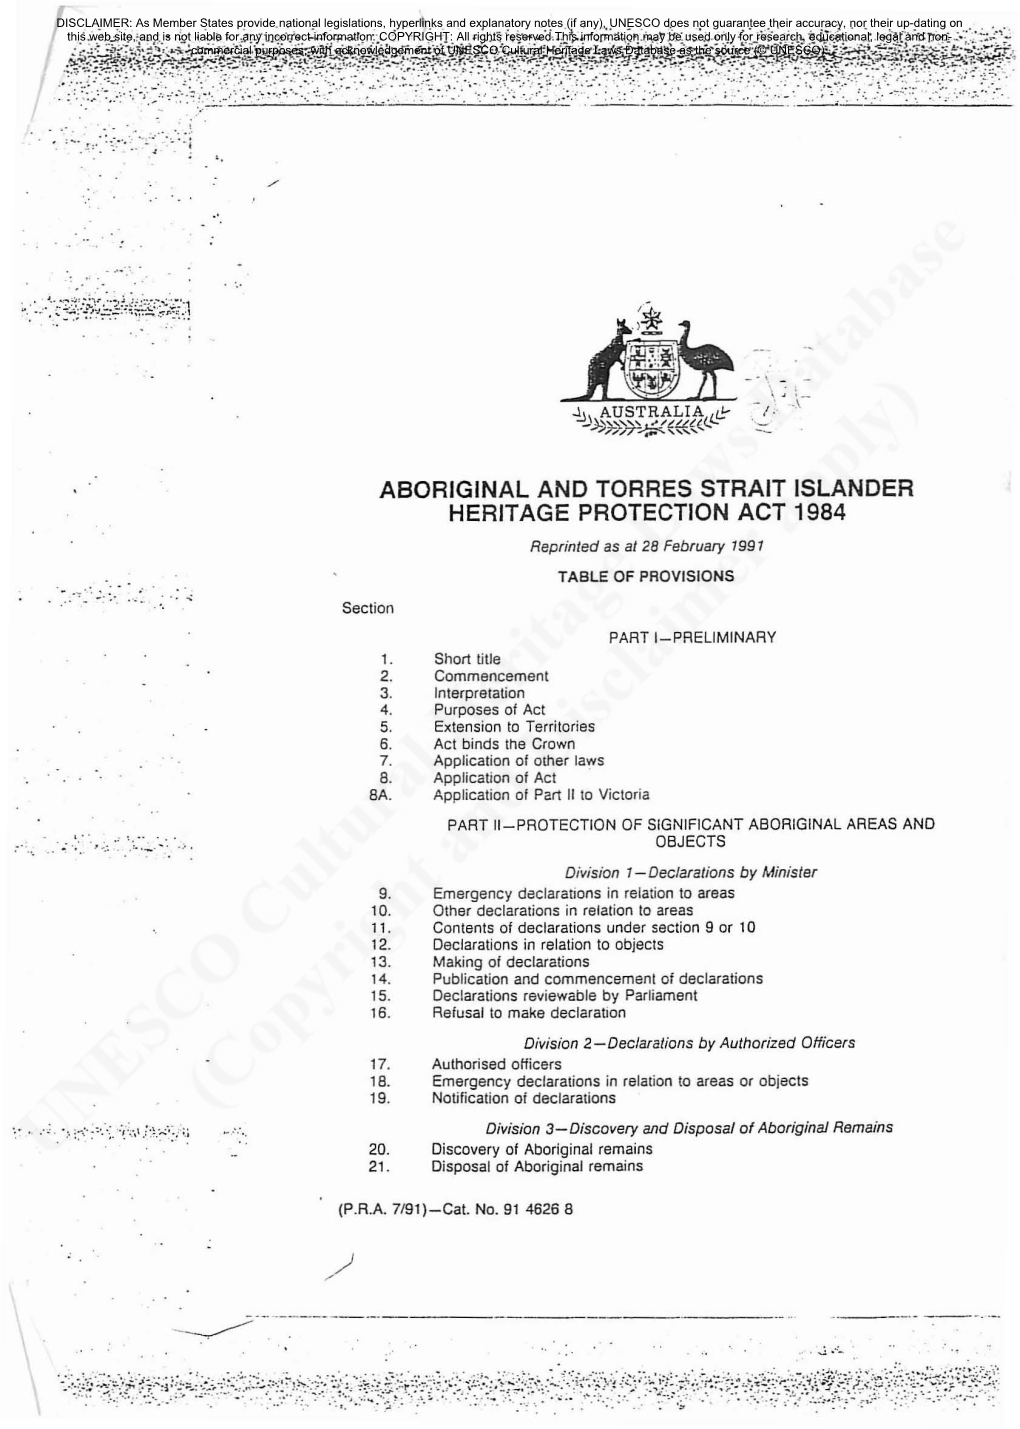 ABORIGINAL and TORRES STRAIT ISLANDER HERITAGE PROTECTION ACT 1984 Reprinted As at 28 February 1991 TABLE of PROVISIONS